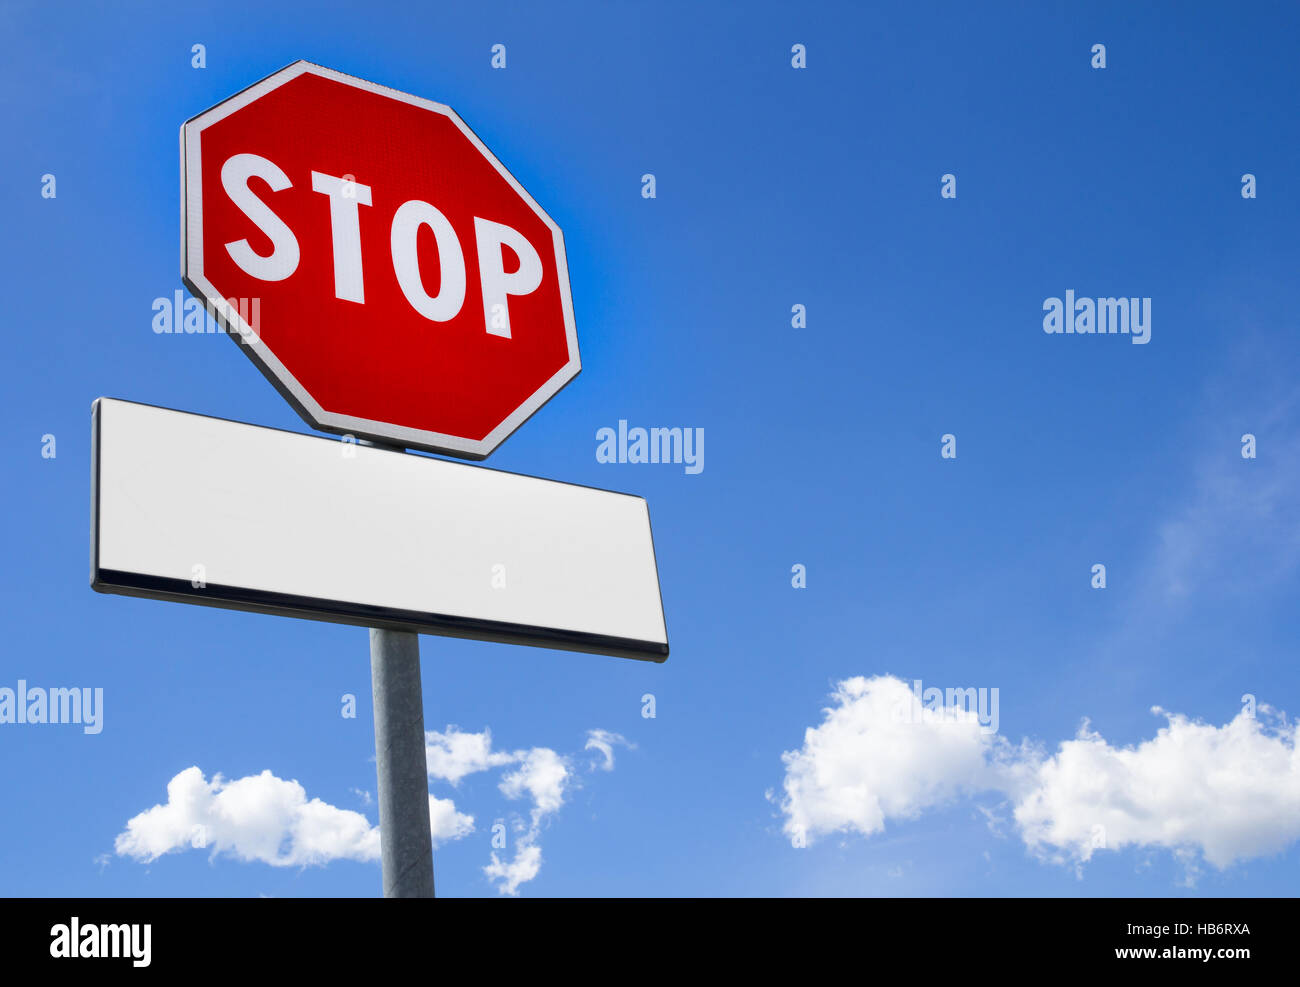 Stop sign with cartel blank Stock Photo